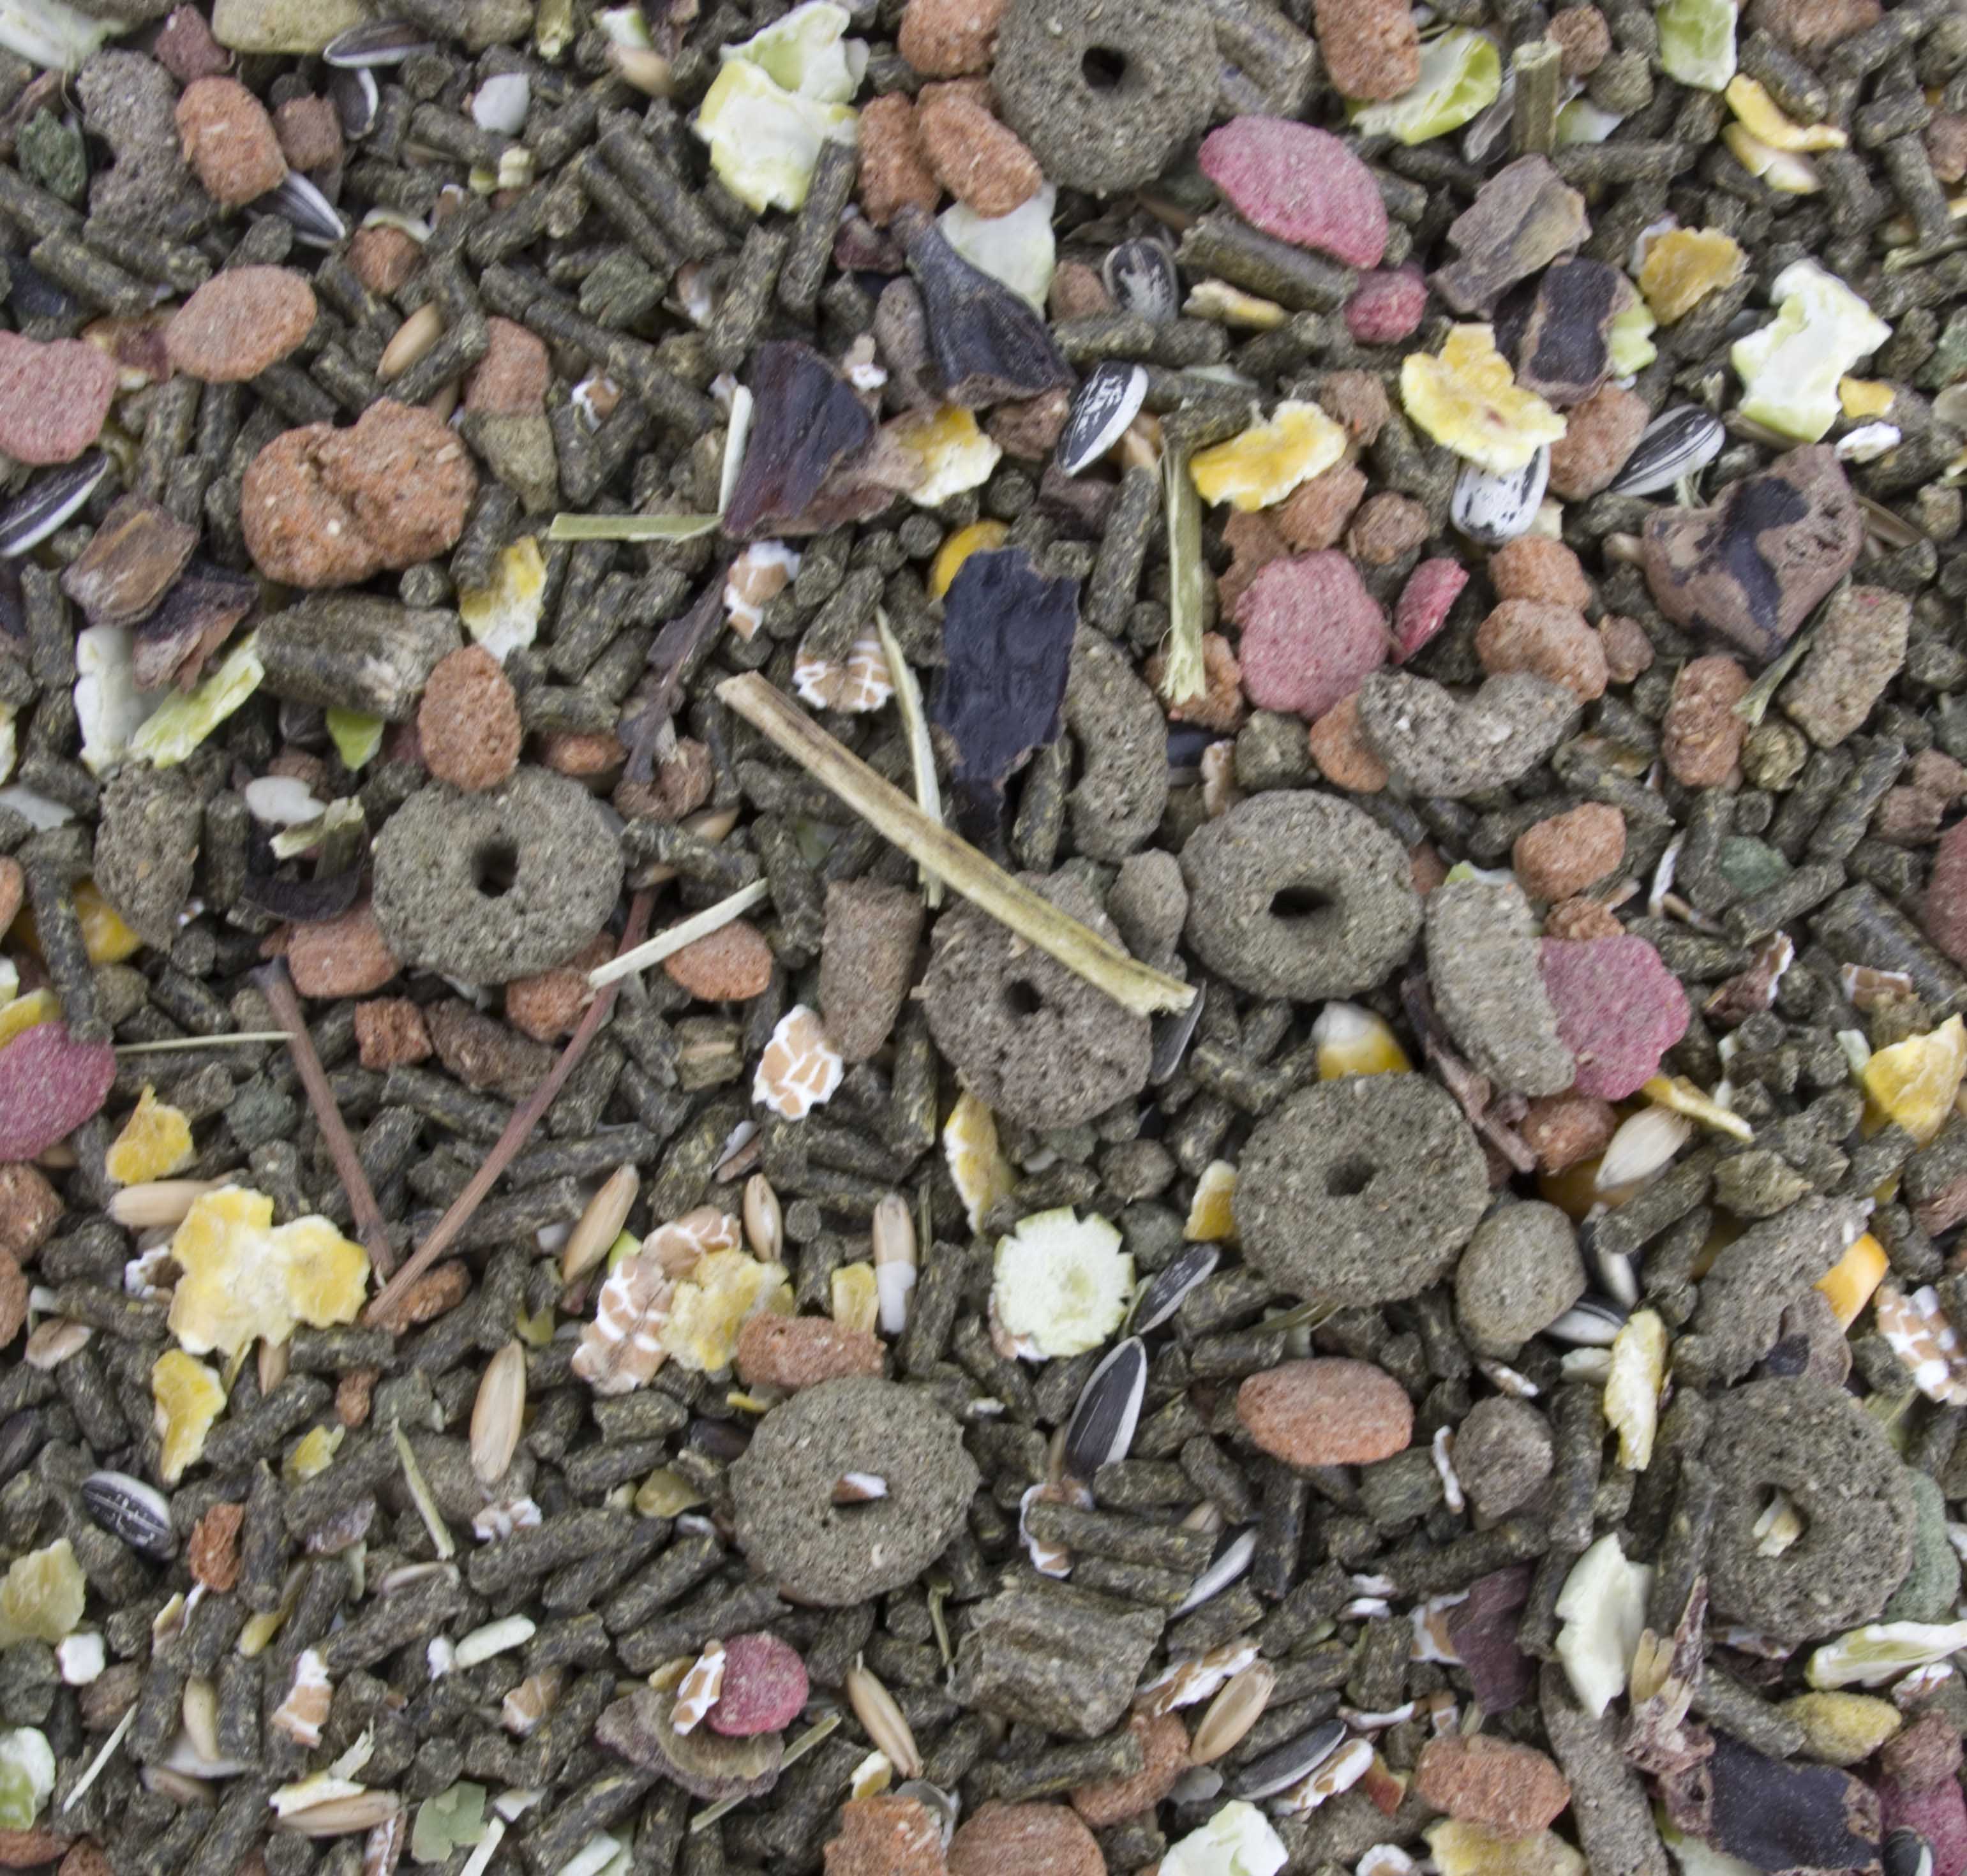 Muesli mix with few flakes and lots of pellets and extrusions